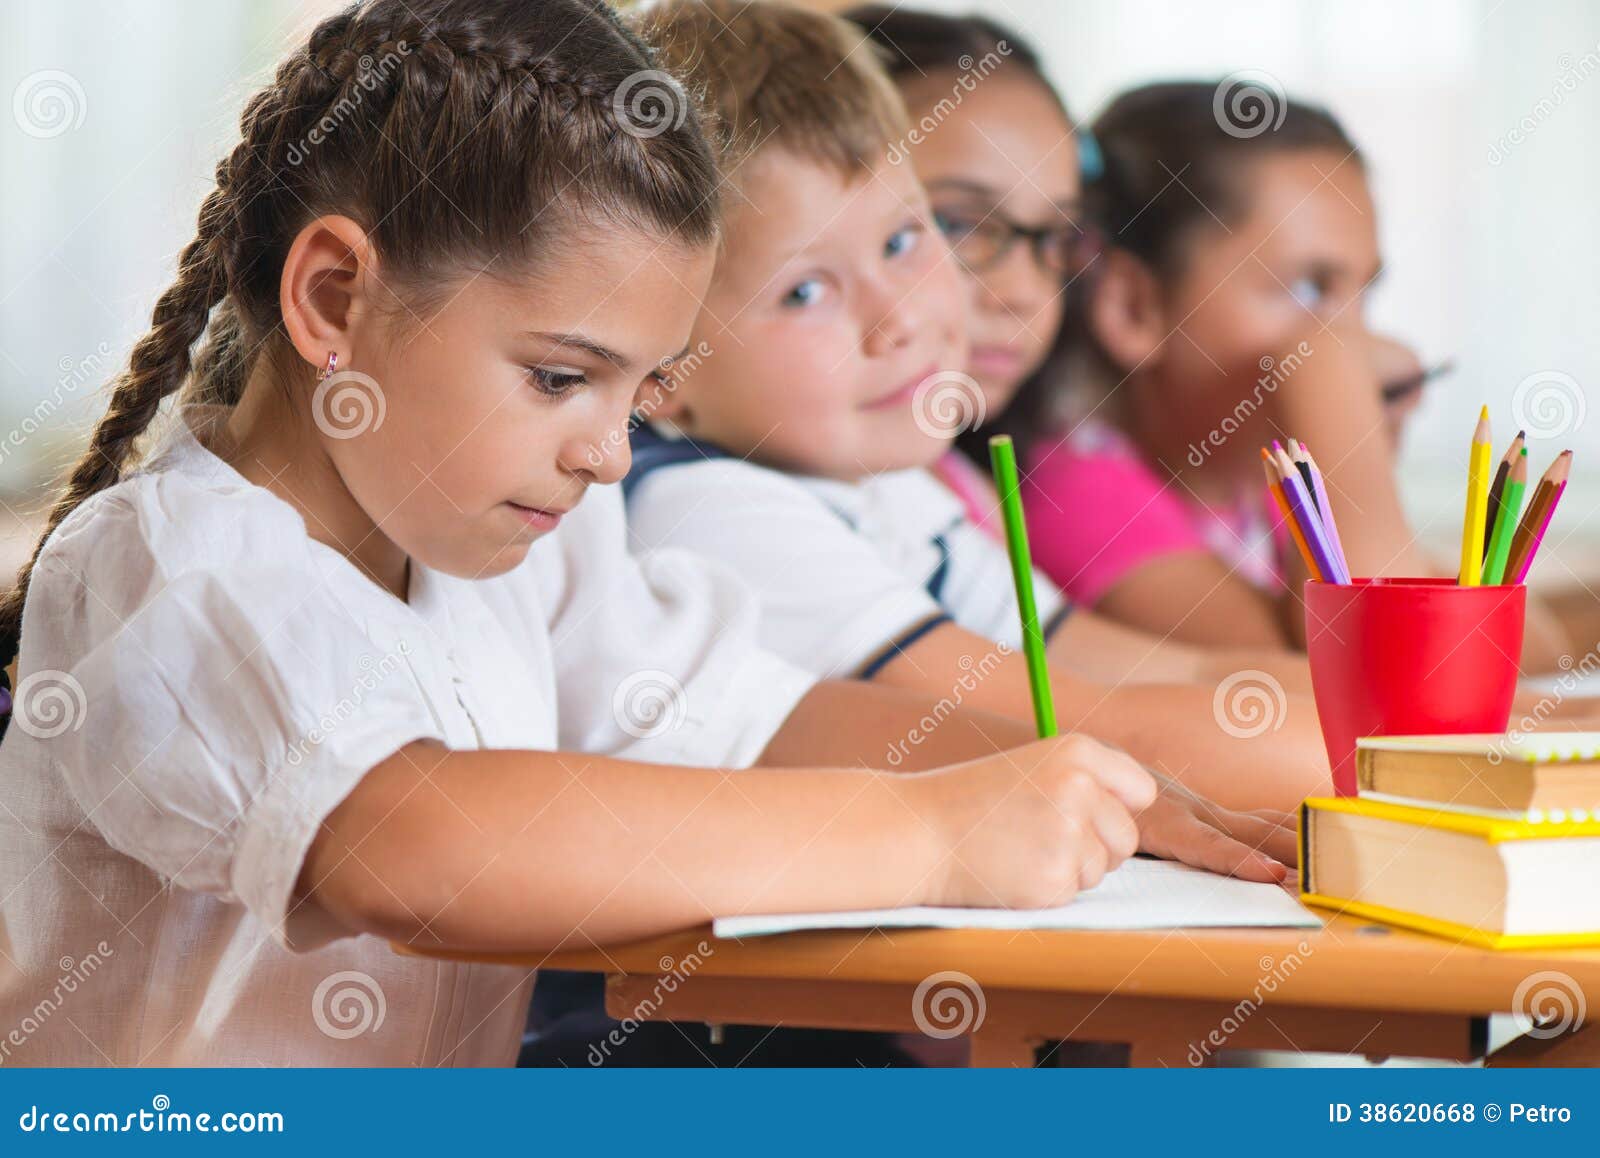 four diligent pupils studying at classroom